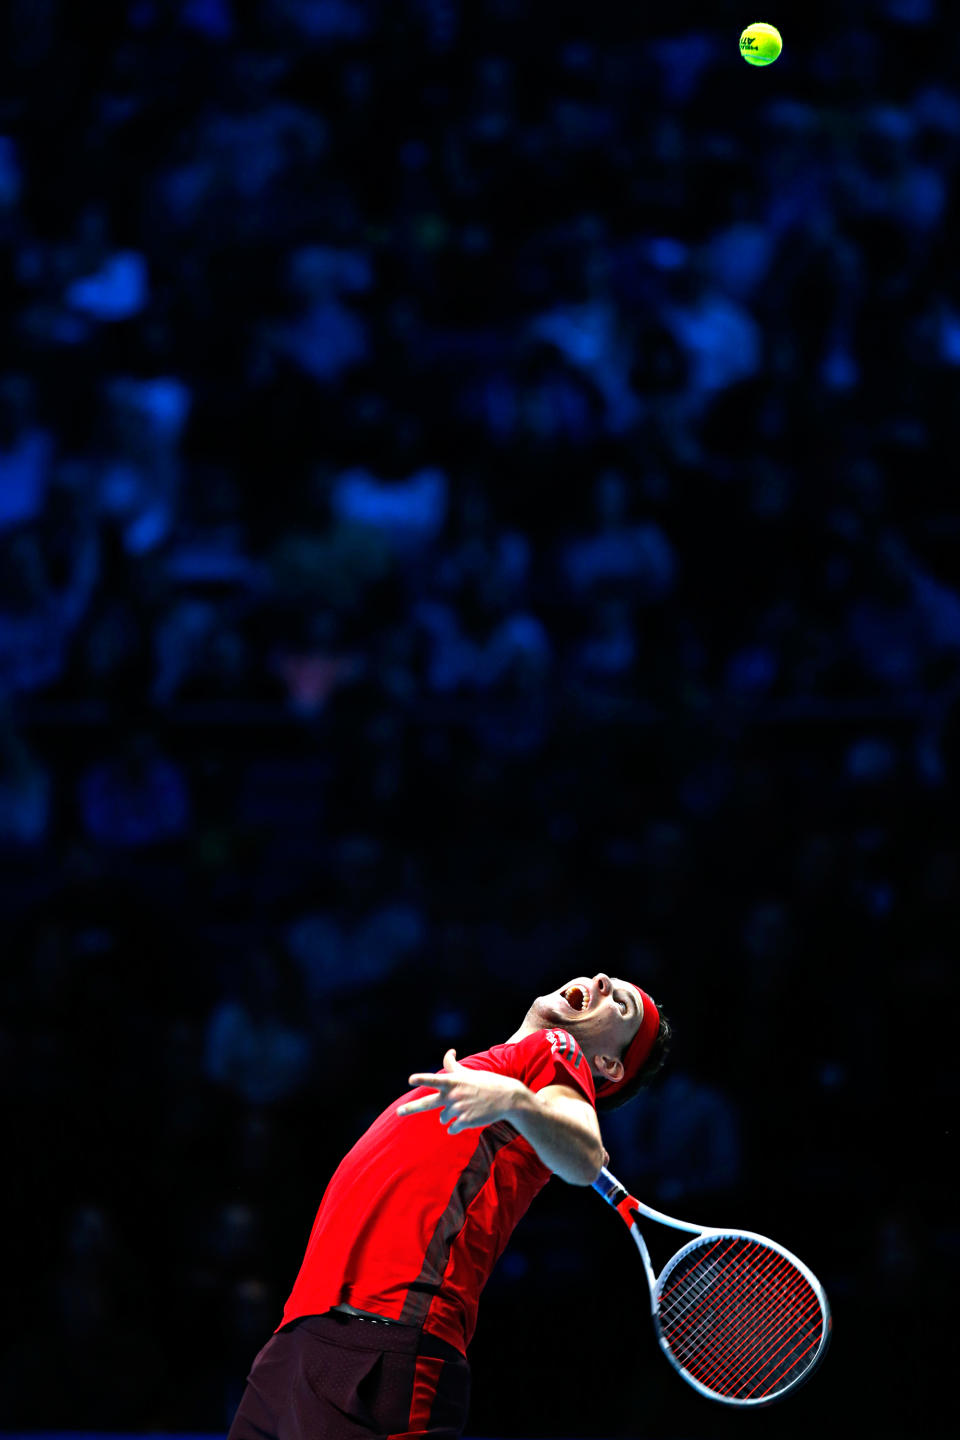 <p>Rafael Nadal of Spain returns the ball to David Goffin of Belgium during their singles tennis match at the ATP World Finals at the O2 Arena in London, Monday, Nov. 13, 2017. (AP Photo/Kirsty Wigglesworth) </p>